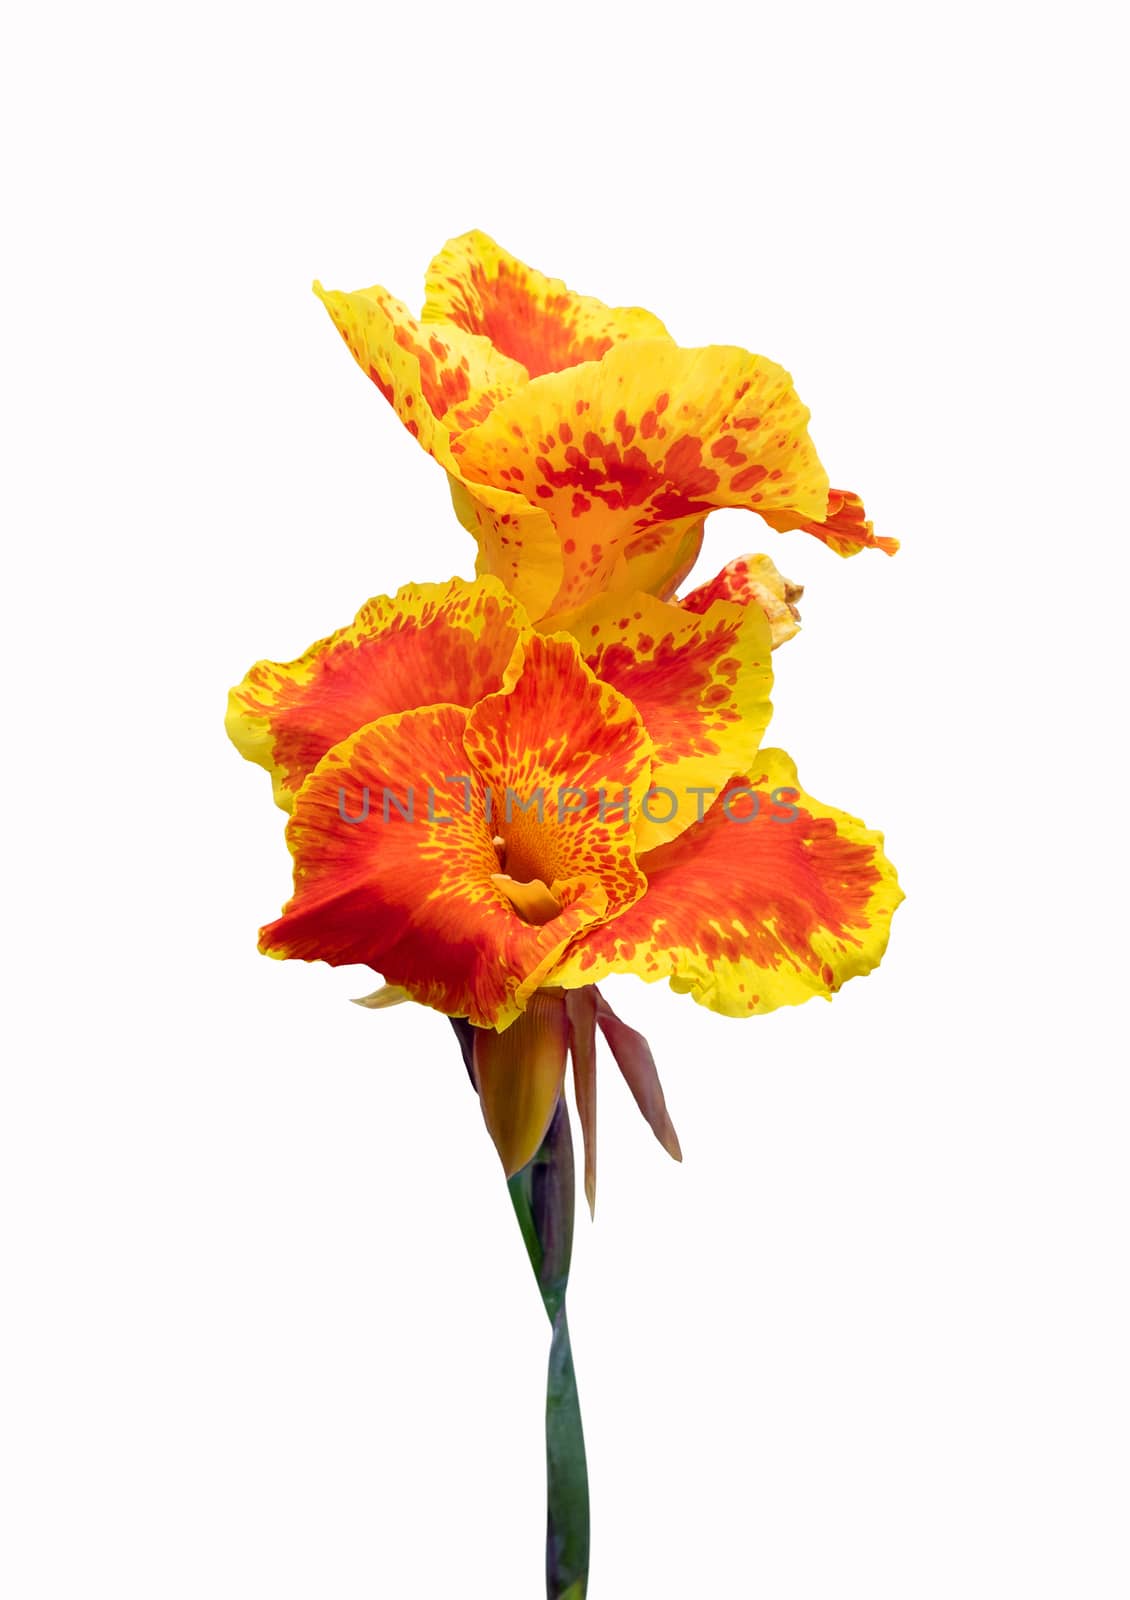 Orange and yellow Canna lily flower isolated on white background.